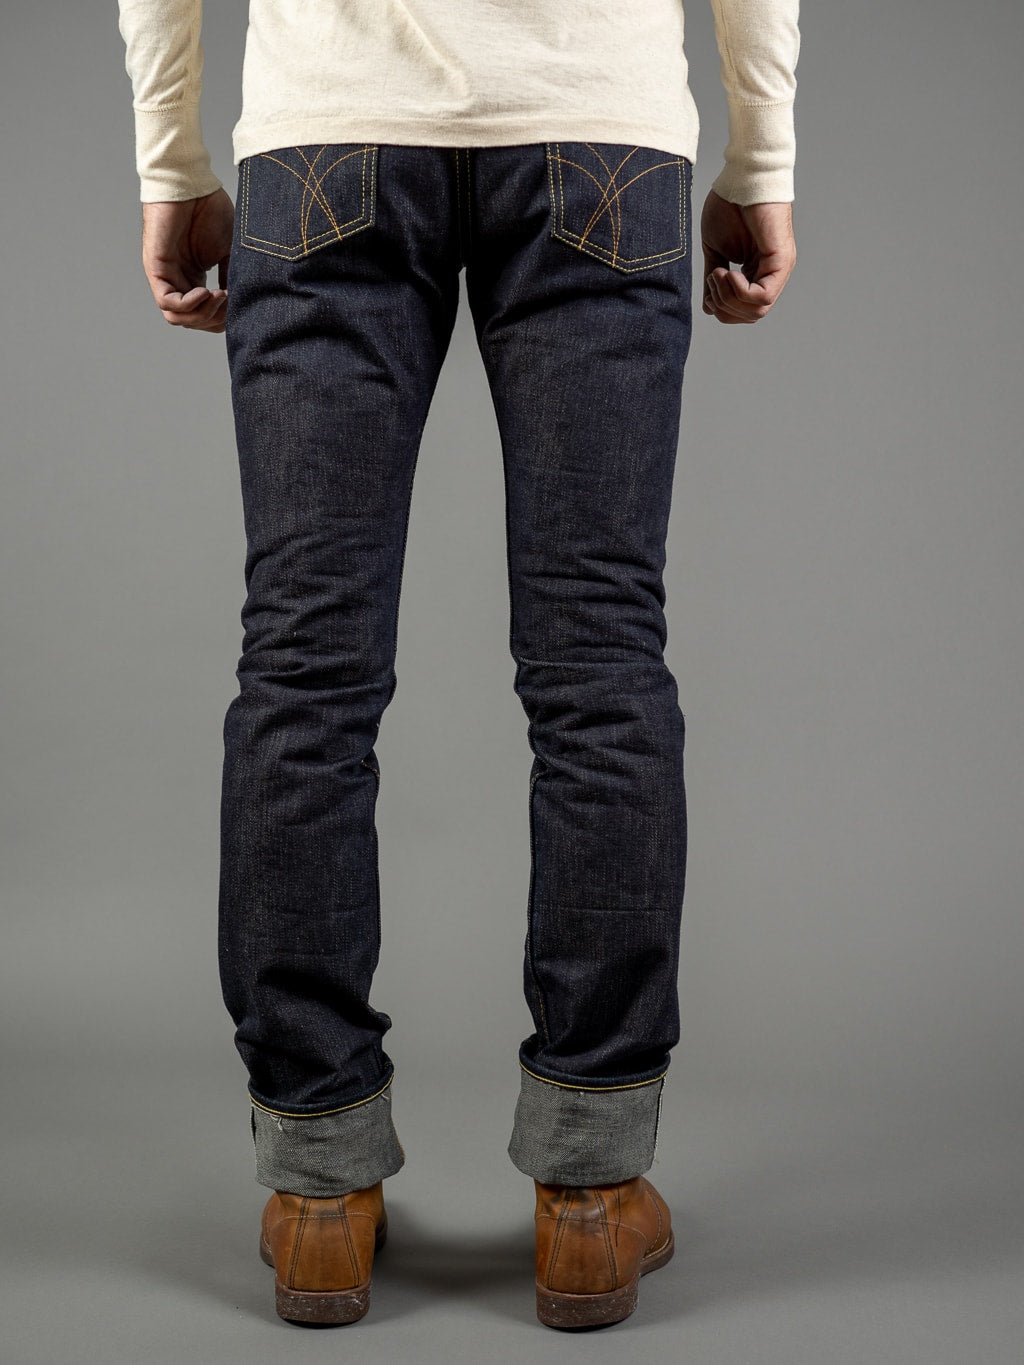 the strike gold 3109left hand twill raw japanese jeans back